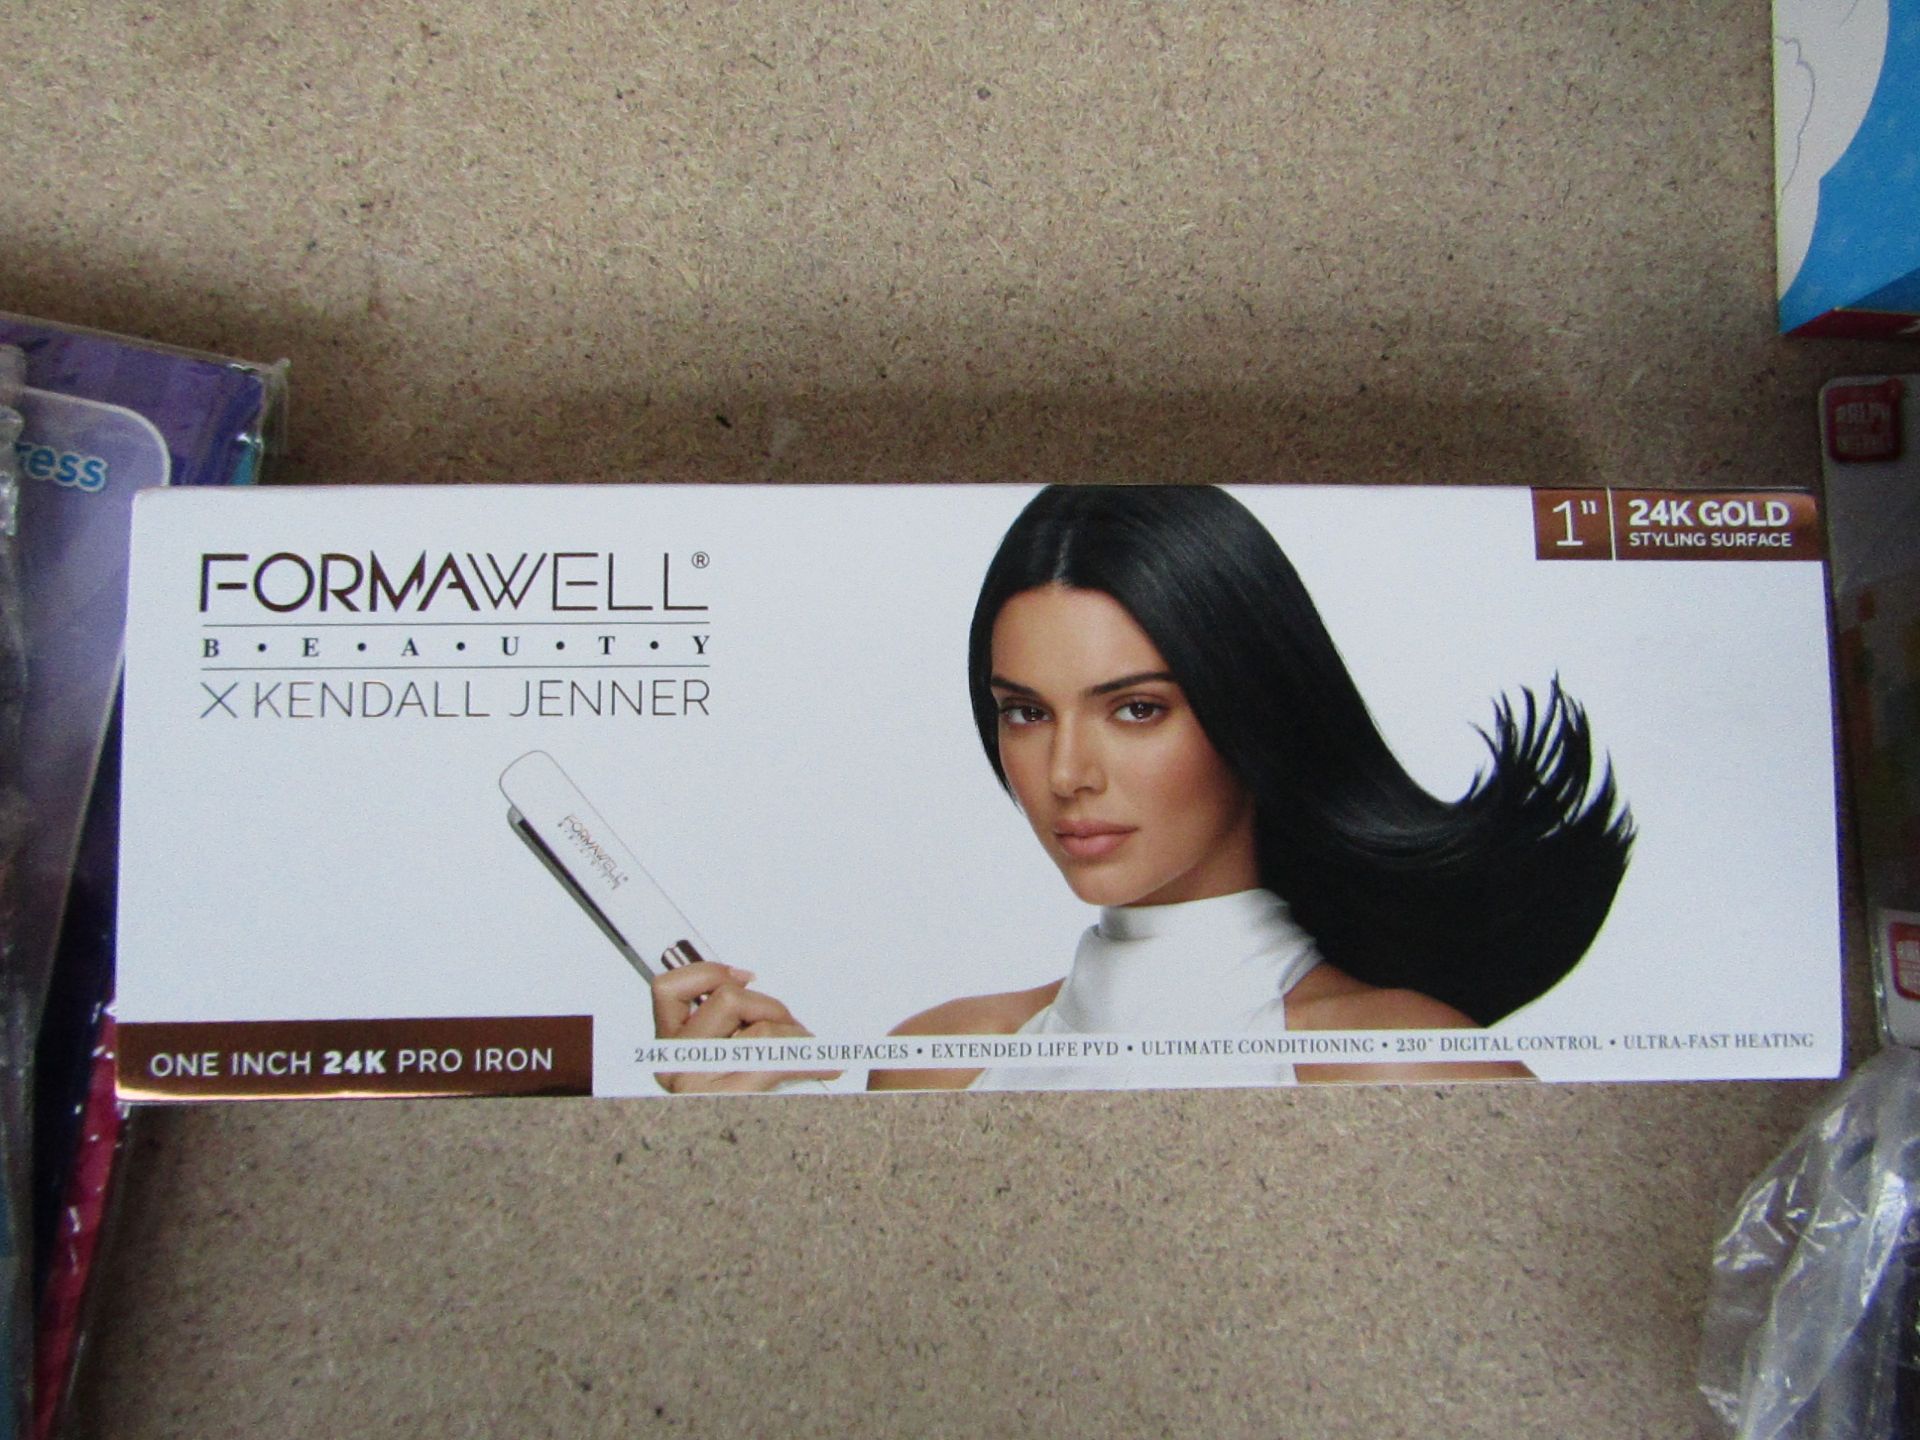 Formawell Beauty by Kendall Jenner - One inch 24k Pro Iron - Unchecked & Boxed